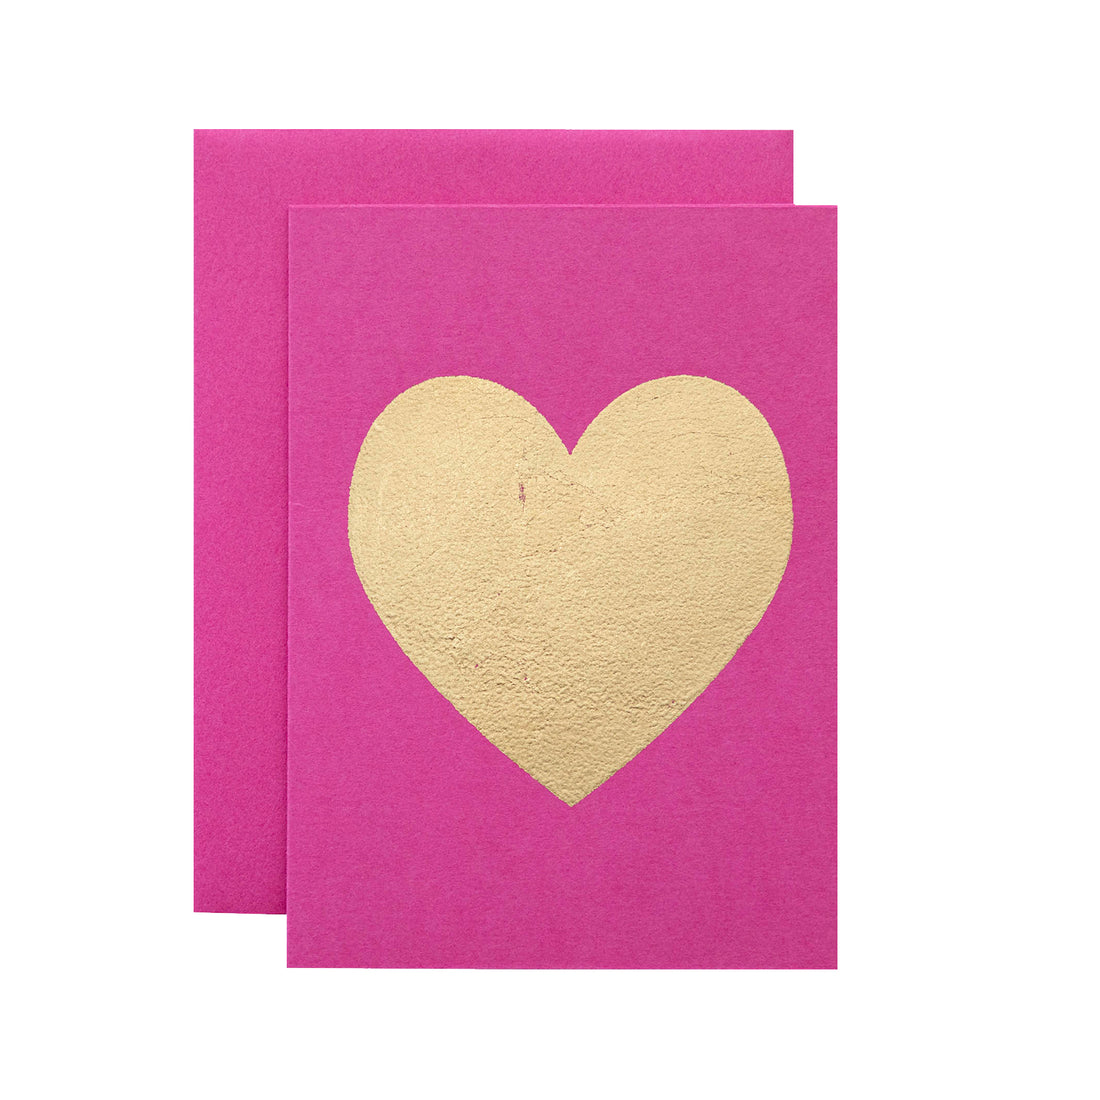 A pink card featuring the silhouette of a heart in solid gold leaf.